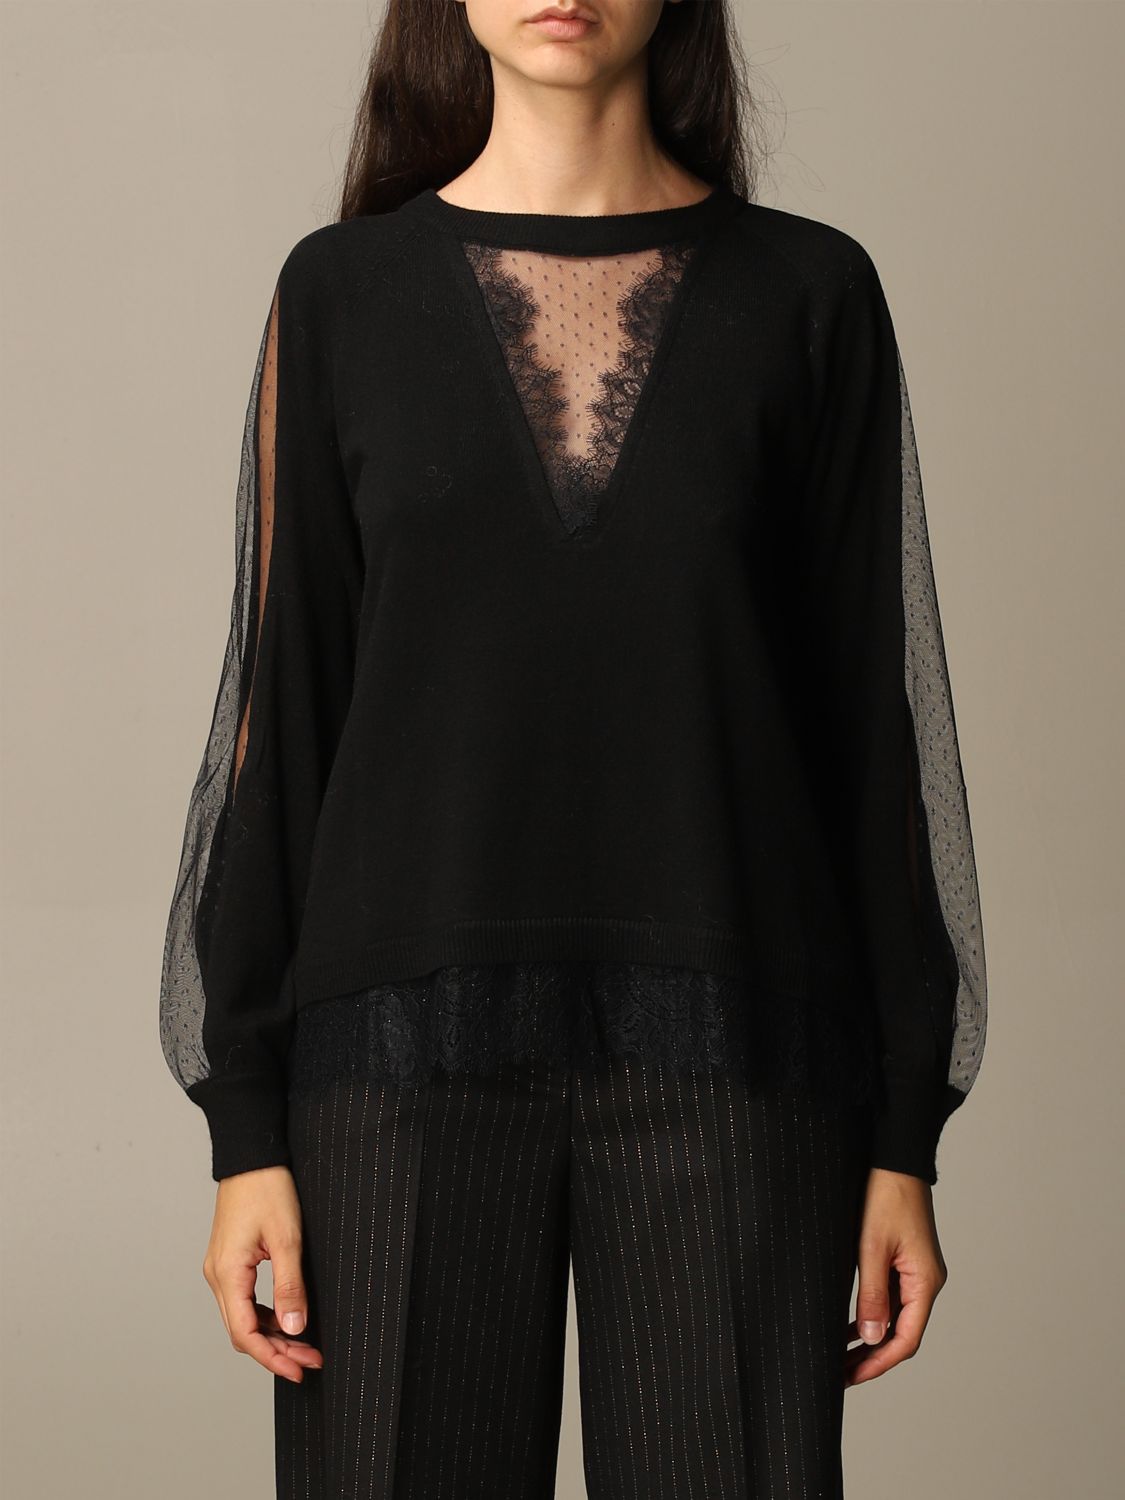 TWINSET: Round neck with lace - Black | Twinset sweater 202TT3133 ...